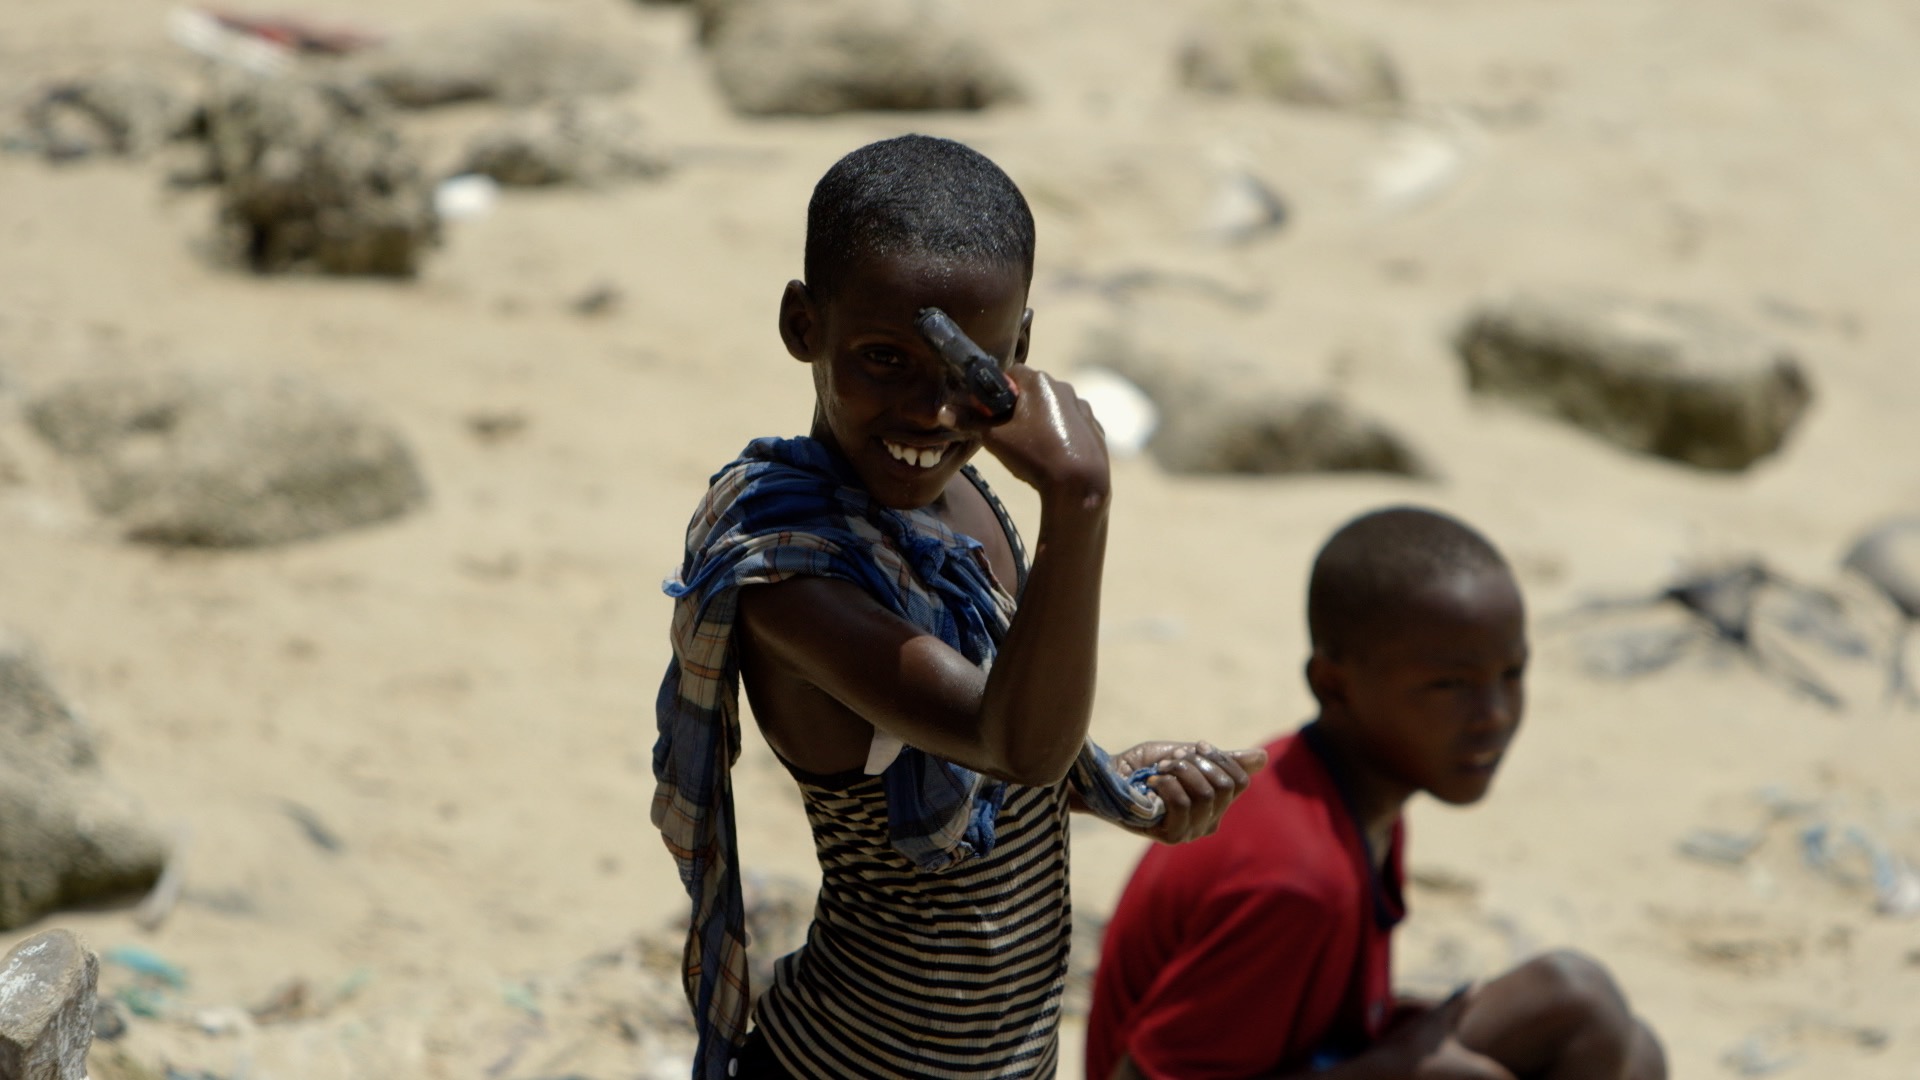 A young Somali boy plays with a gun at the beach.